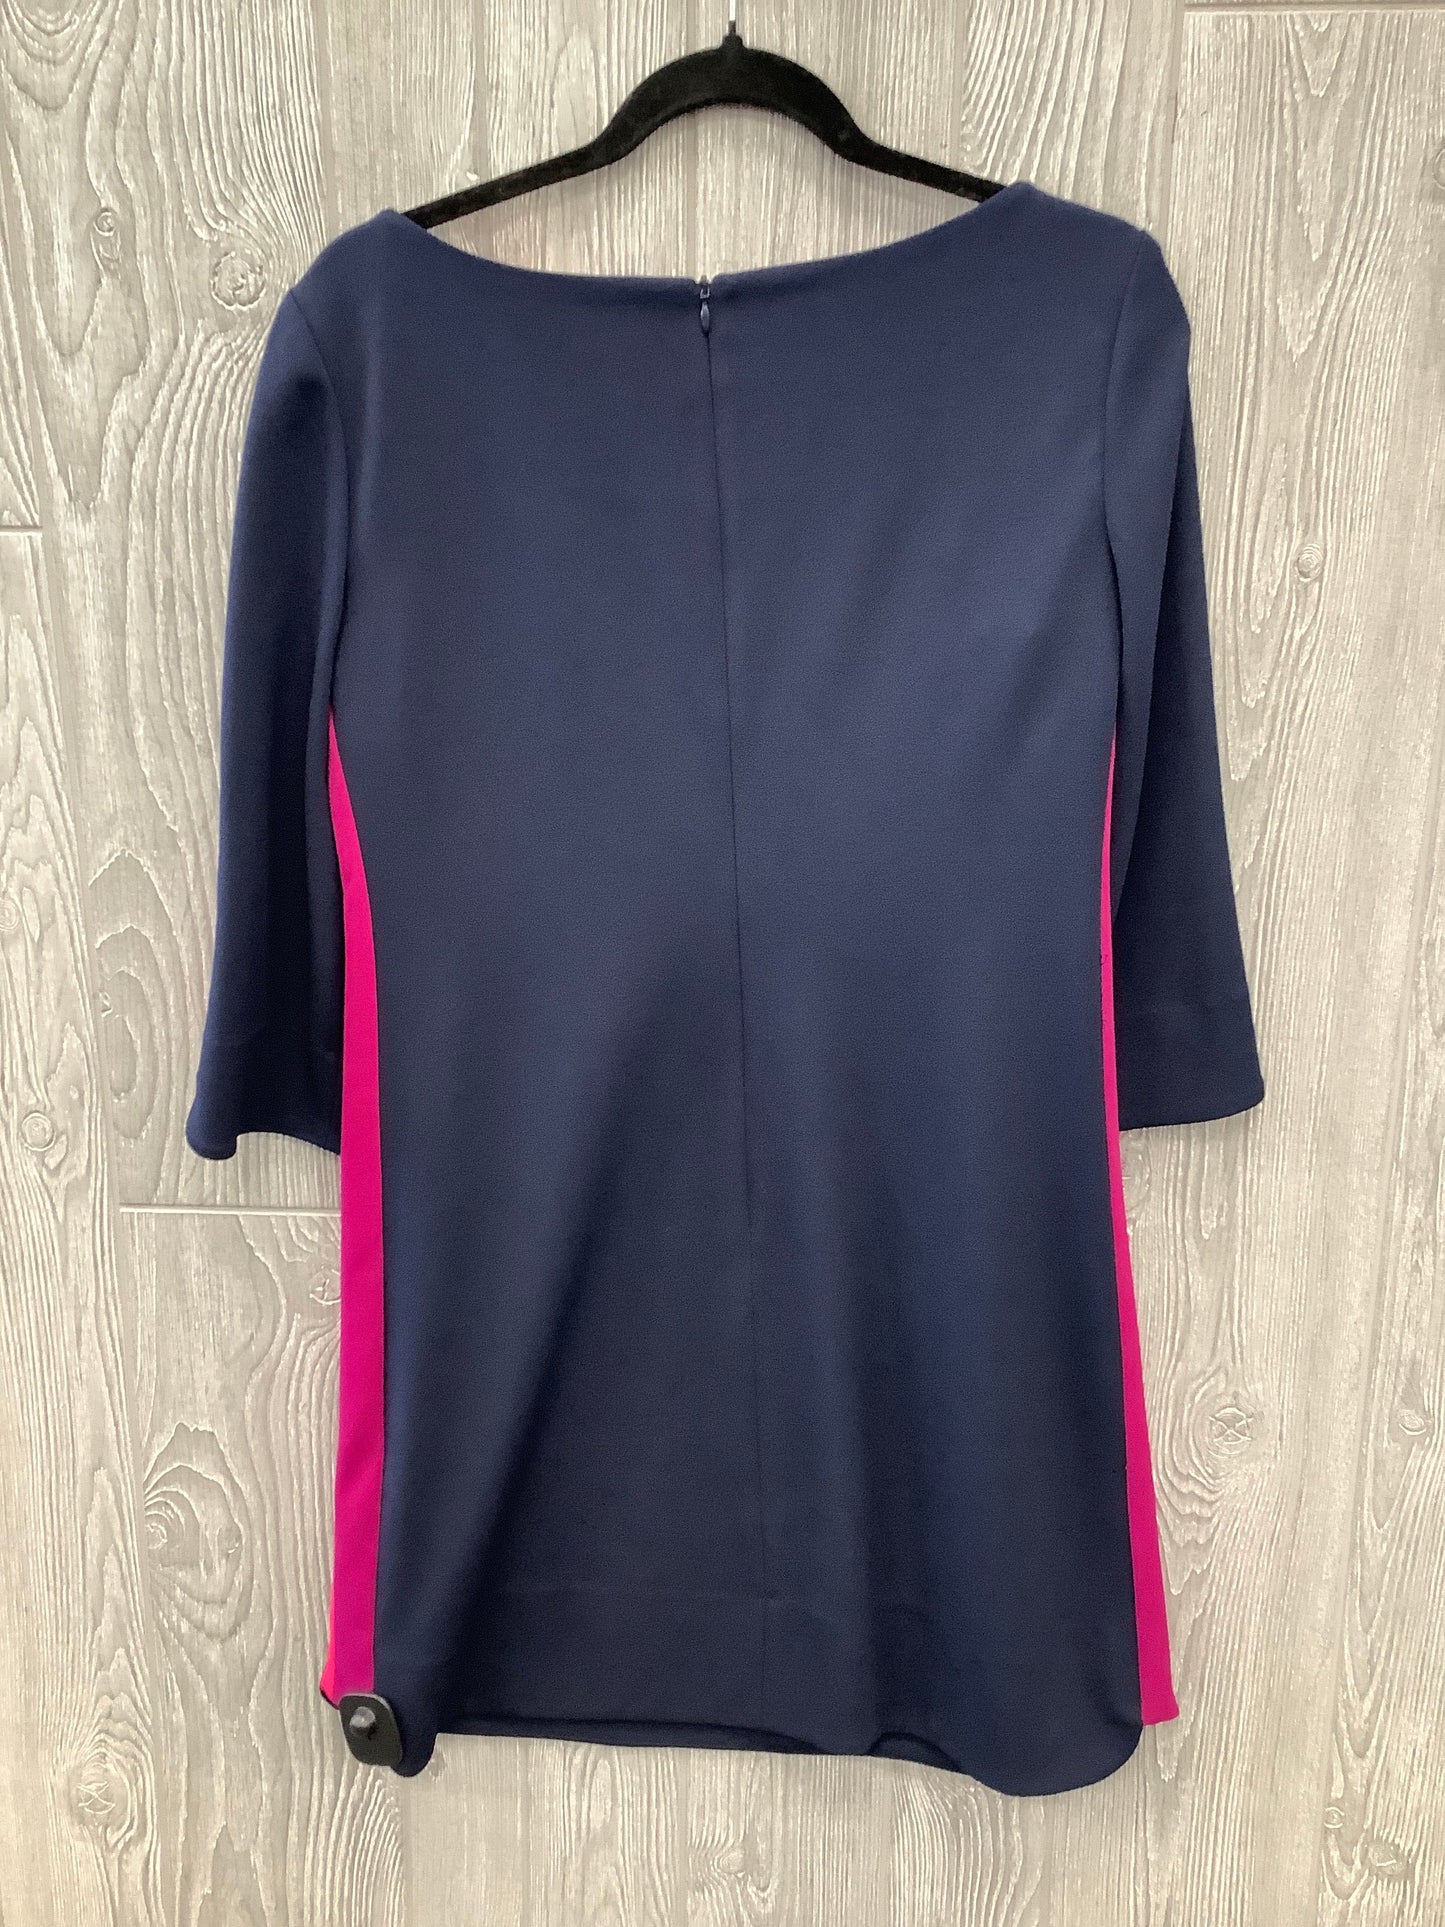 Navy Dress Work Vince Camuto, Size M